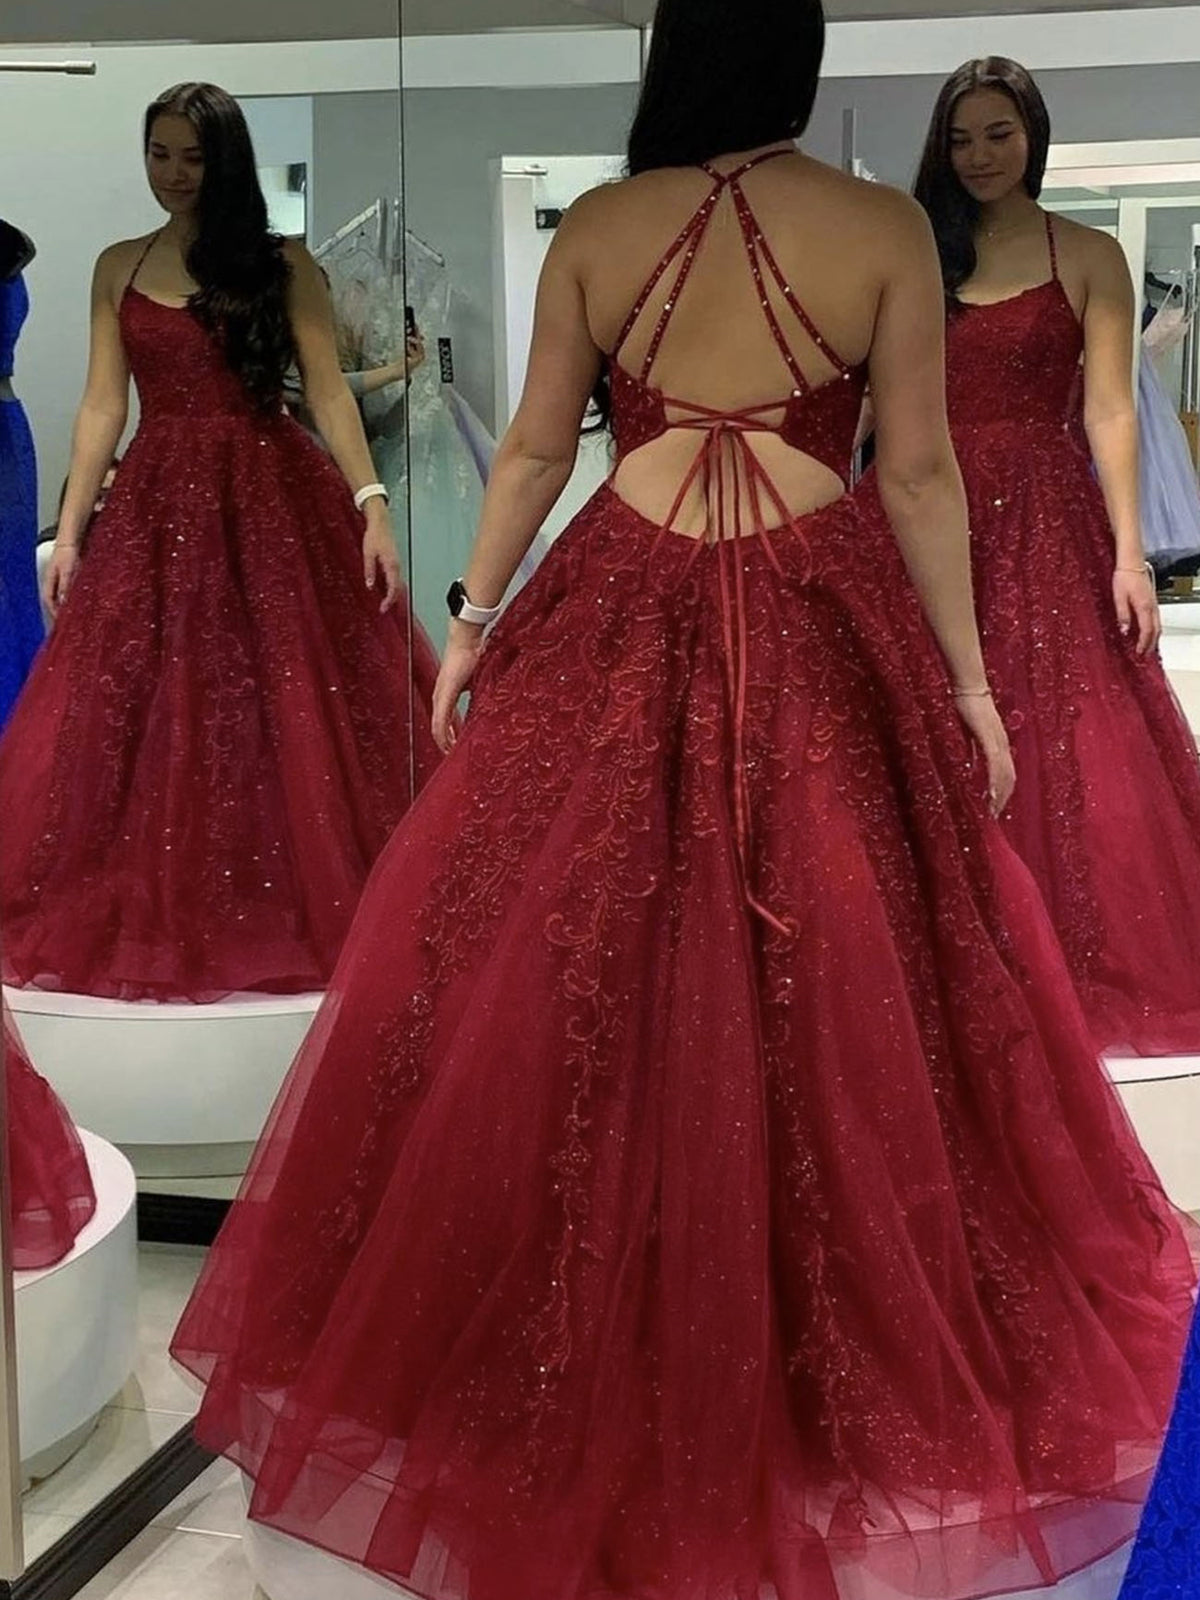 Shiny Tulle Backless Burgundy Lace Long Prom Dresses, Burgundy Lace Formal Dresses, Burgundy Evening Dresses 